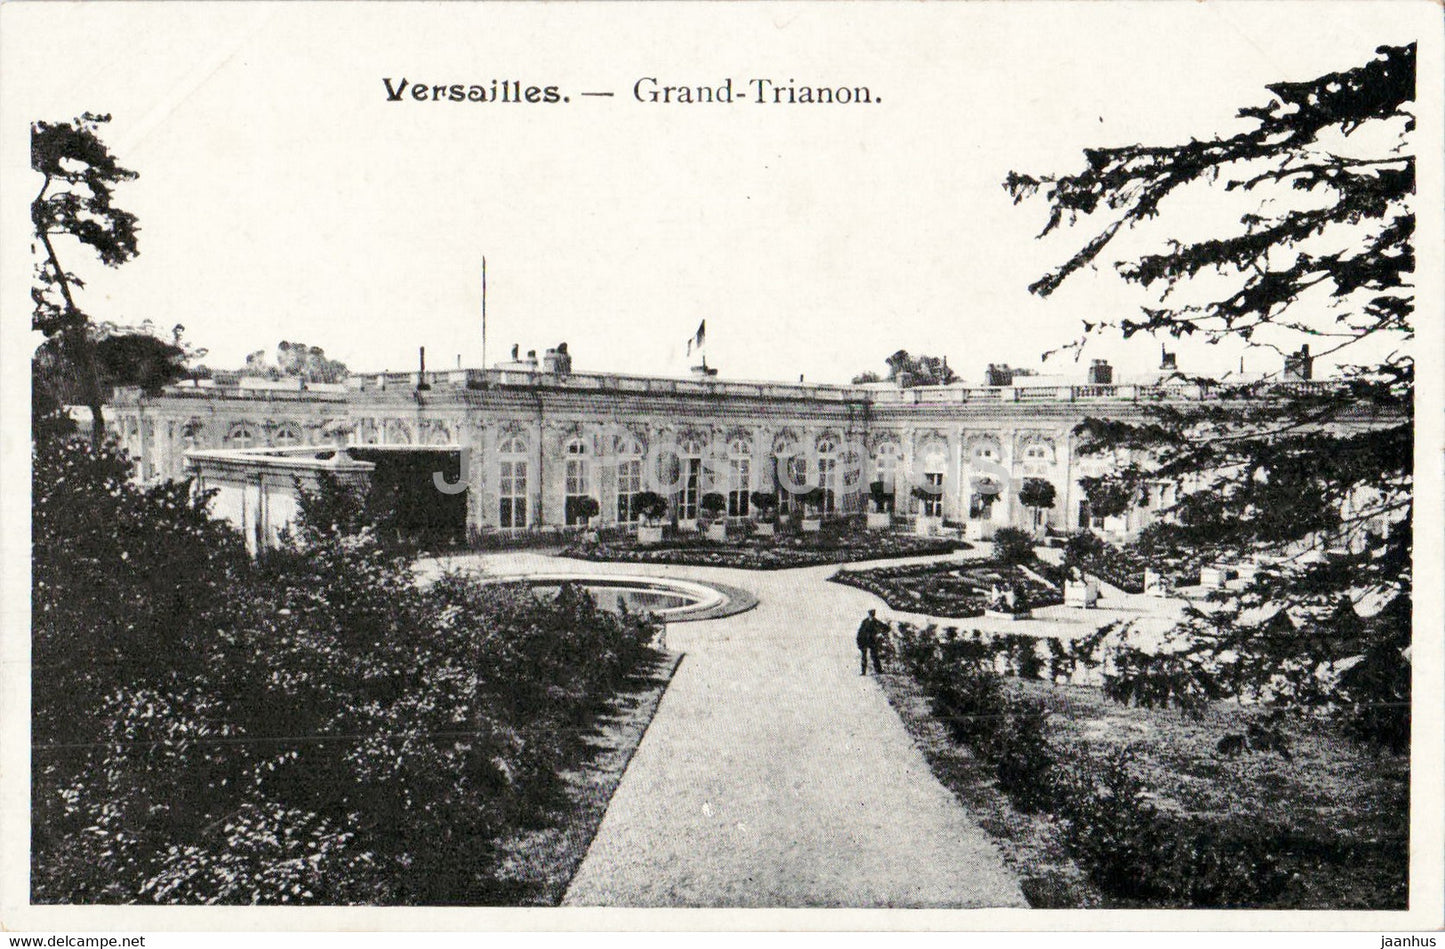 Versailles - Grand Trianon - old postcard - France - unused - JH Postcards